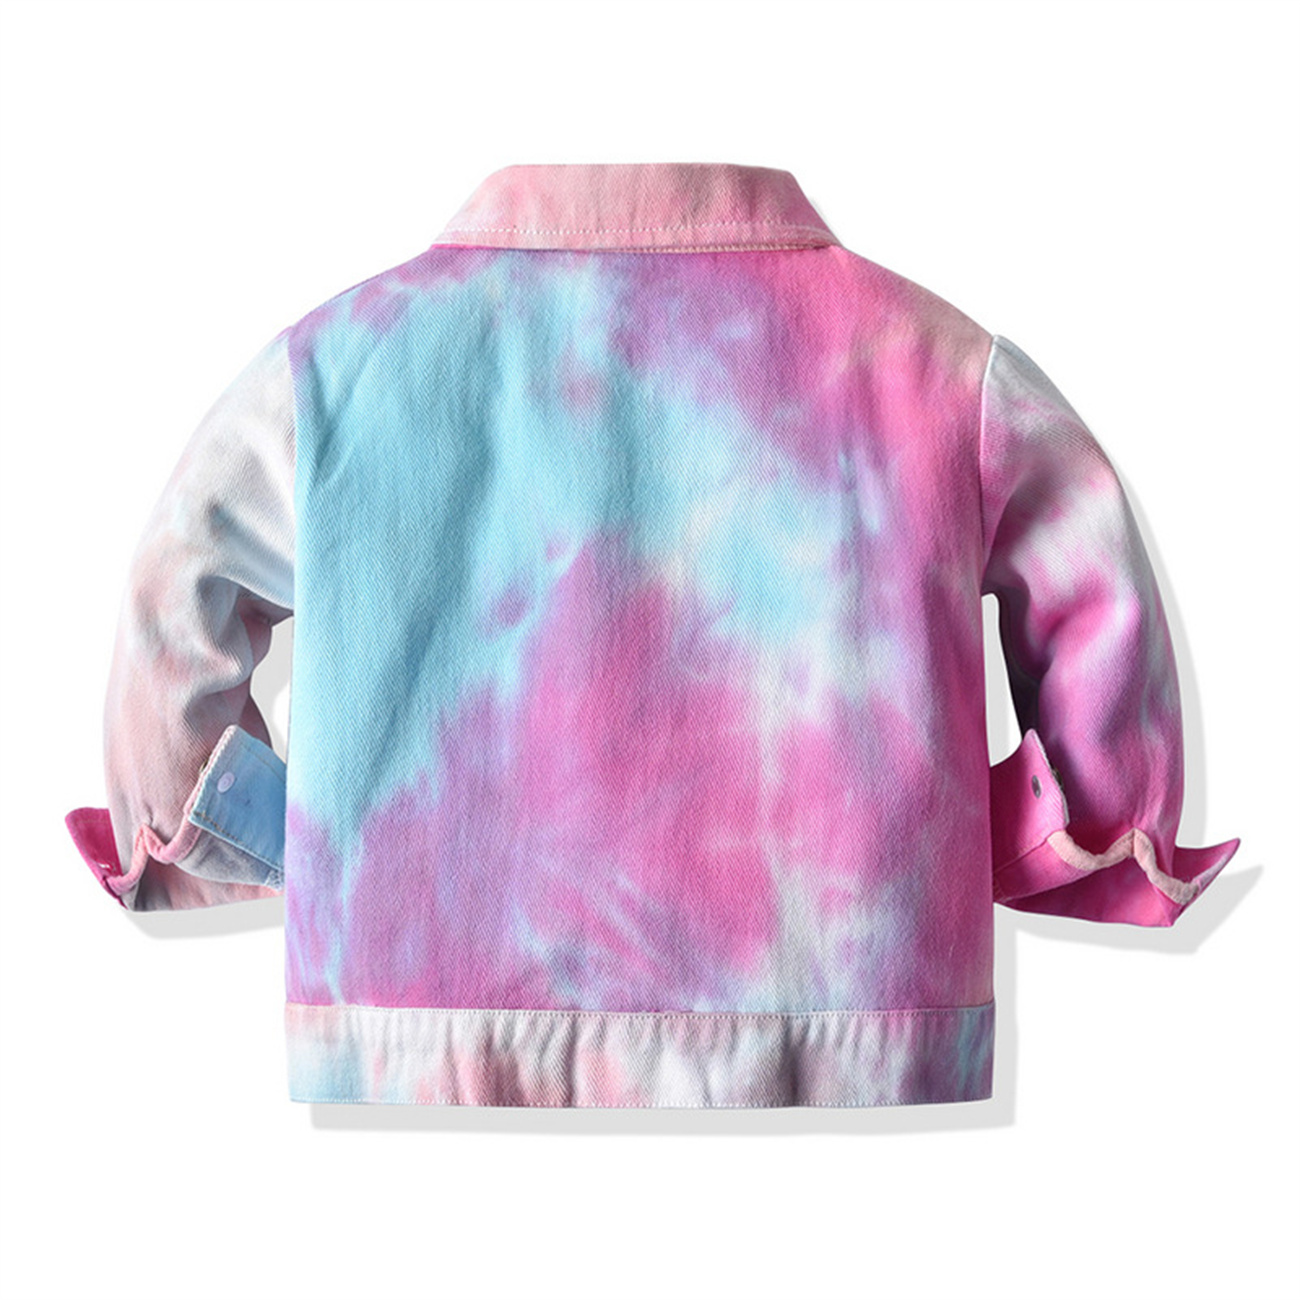 Toddler Tie-dye Denim Jean Jacket for Girls Boys Size 1-7T Single-breasted Mid-length Jacket for Spring Fall,Pink,3-4 Years - image 2 of 7